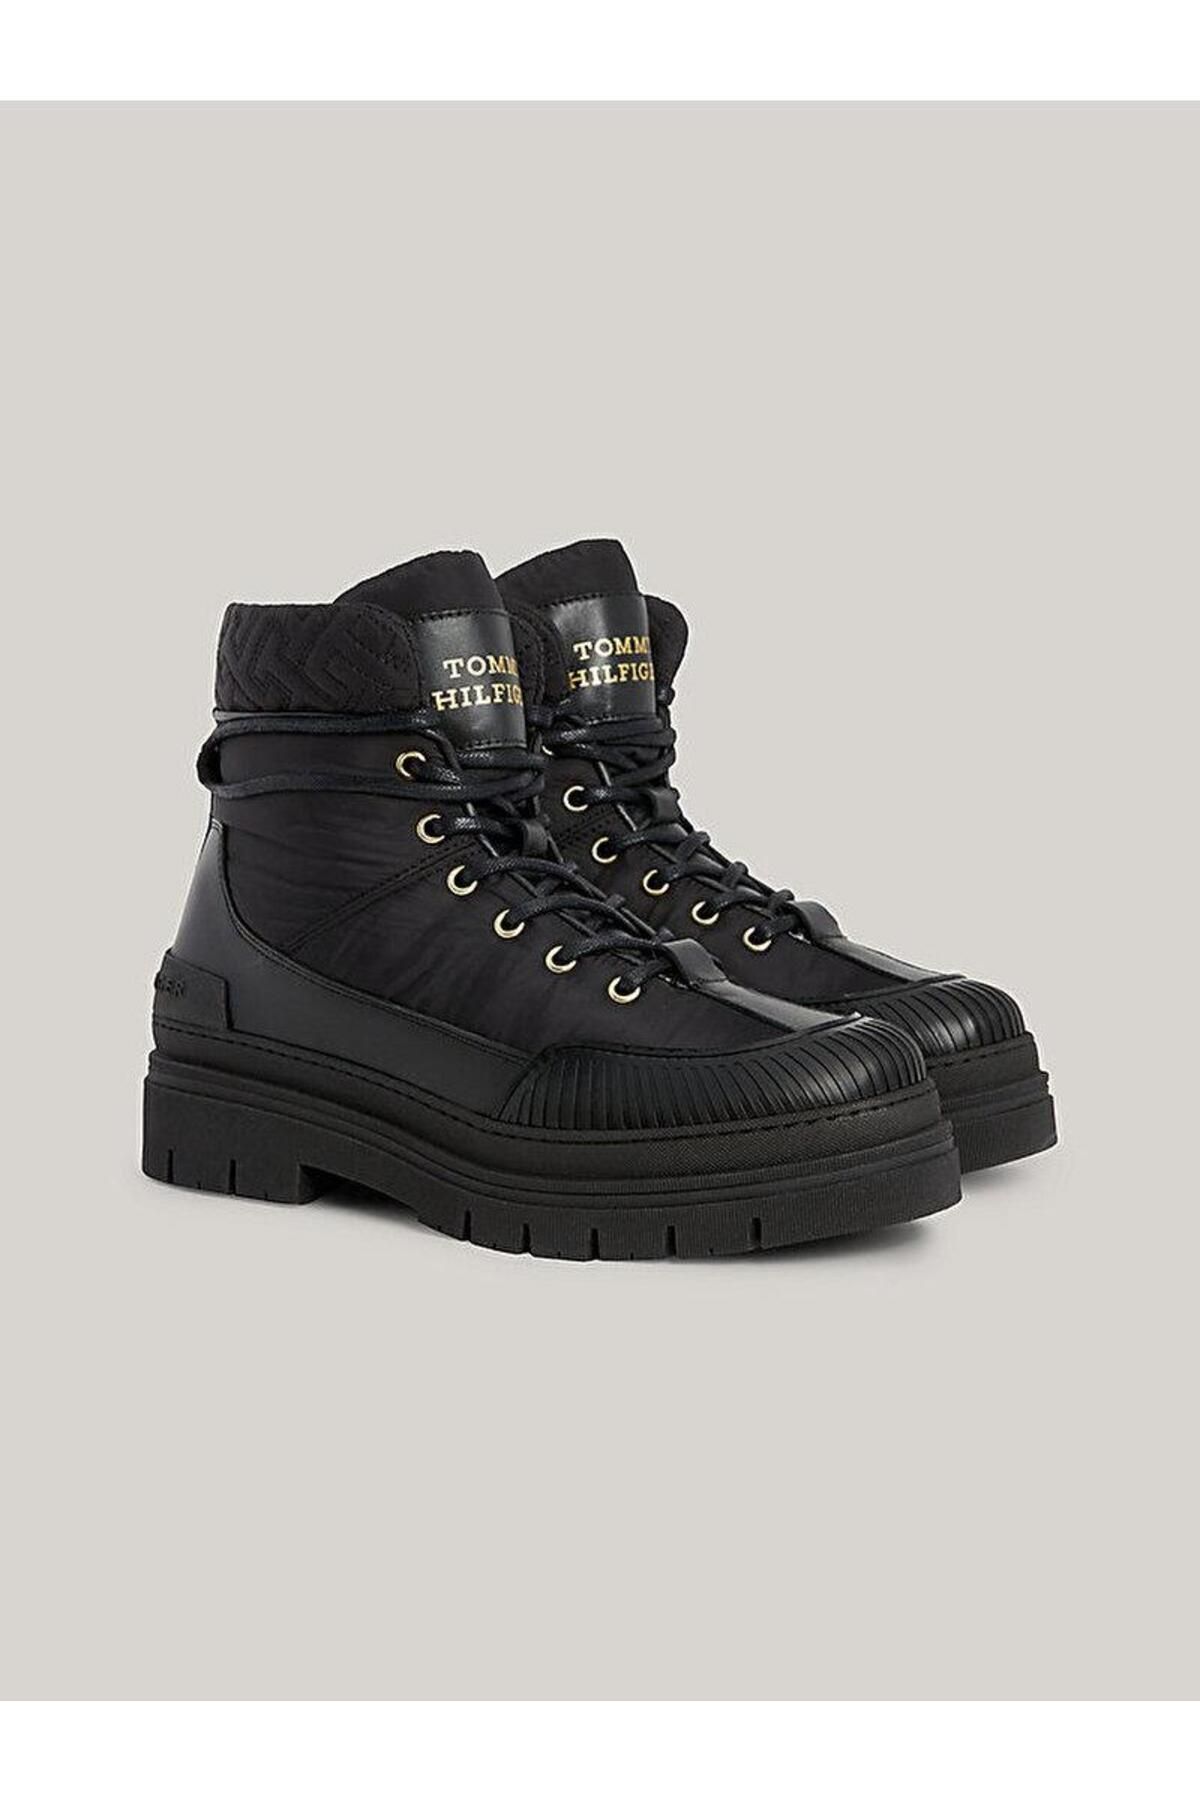 Tommy Hilfiger TH MONOGRAM OUTDOOR BOOT